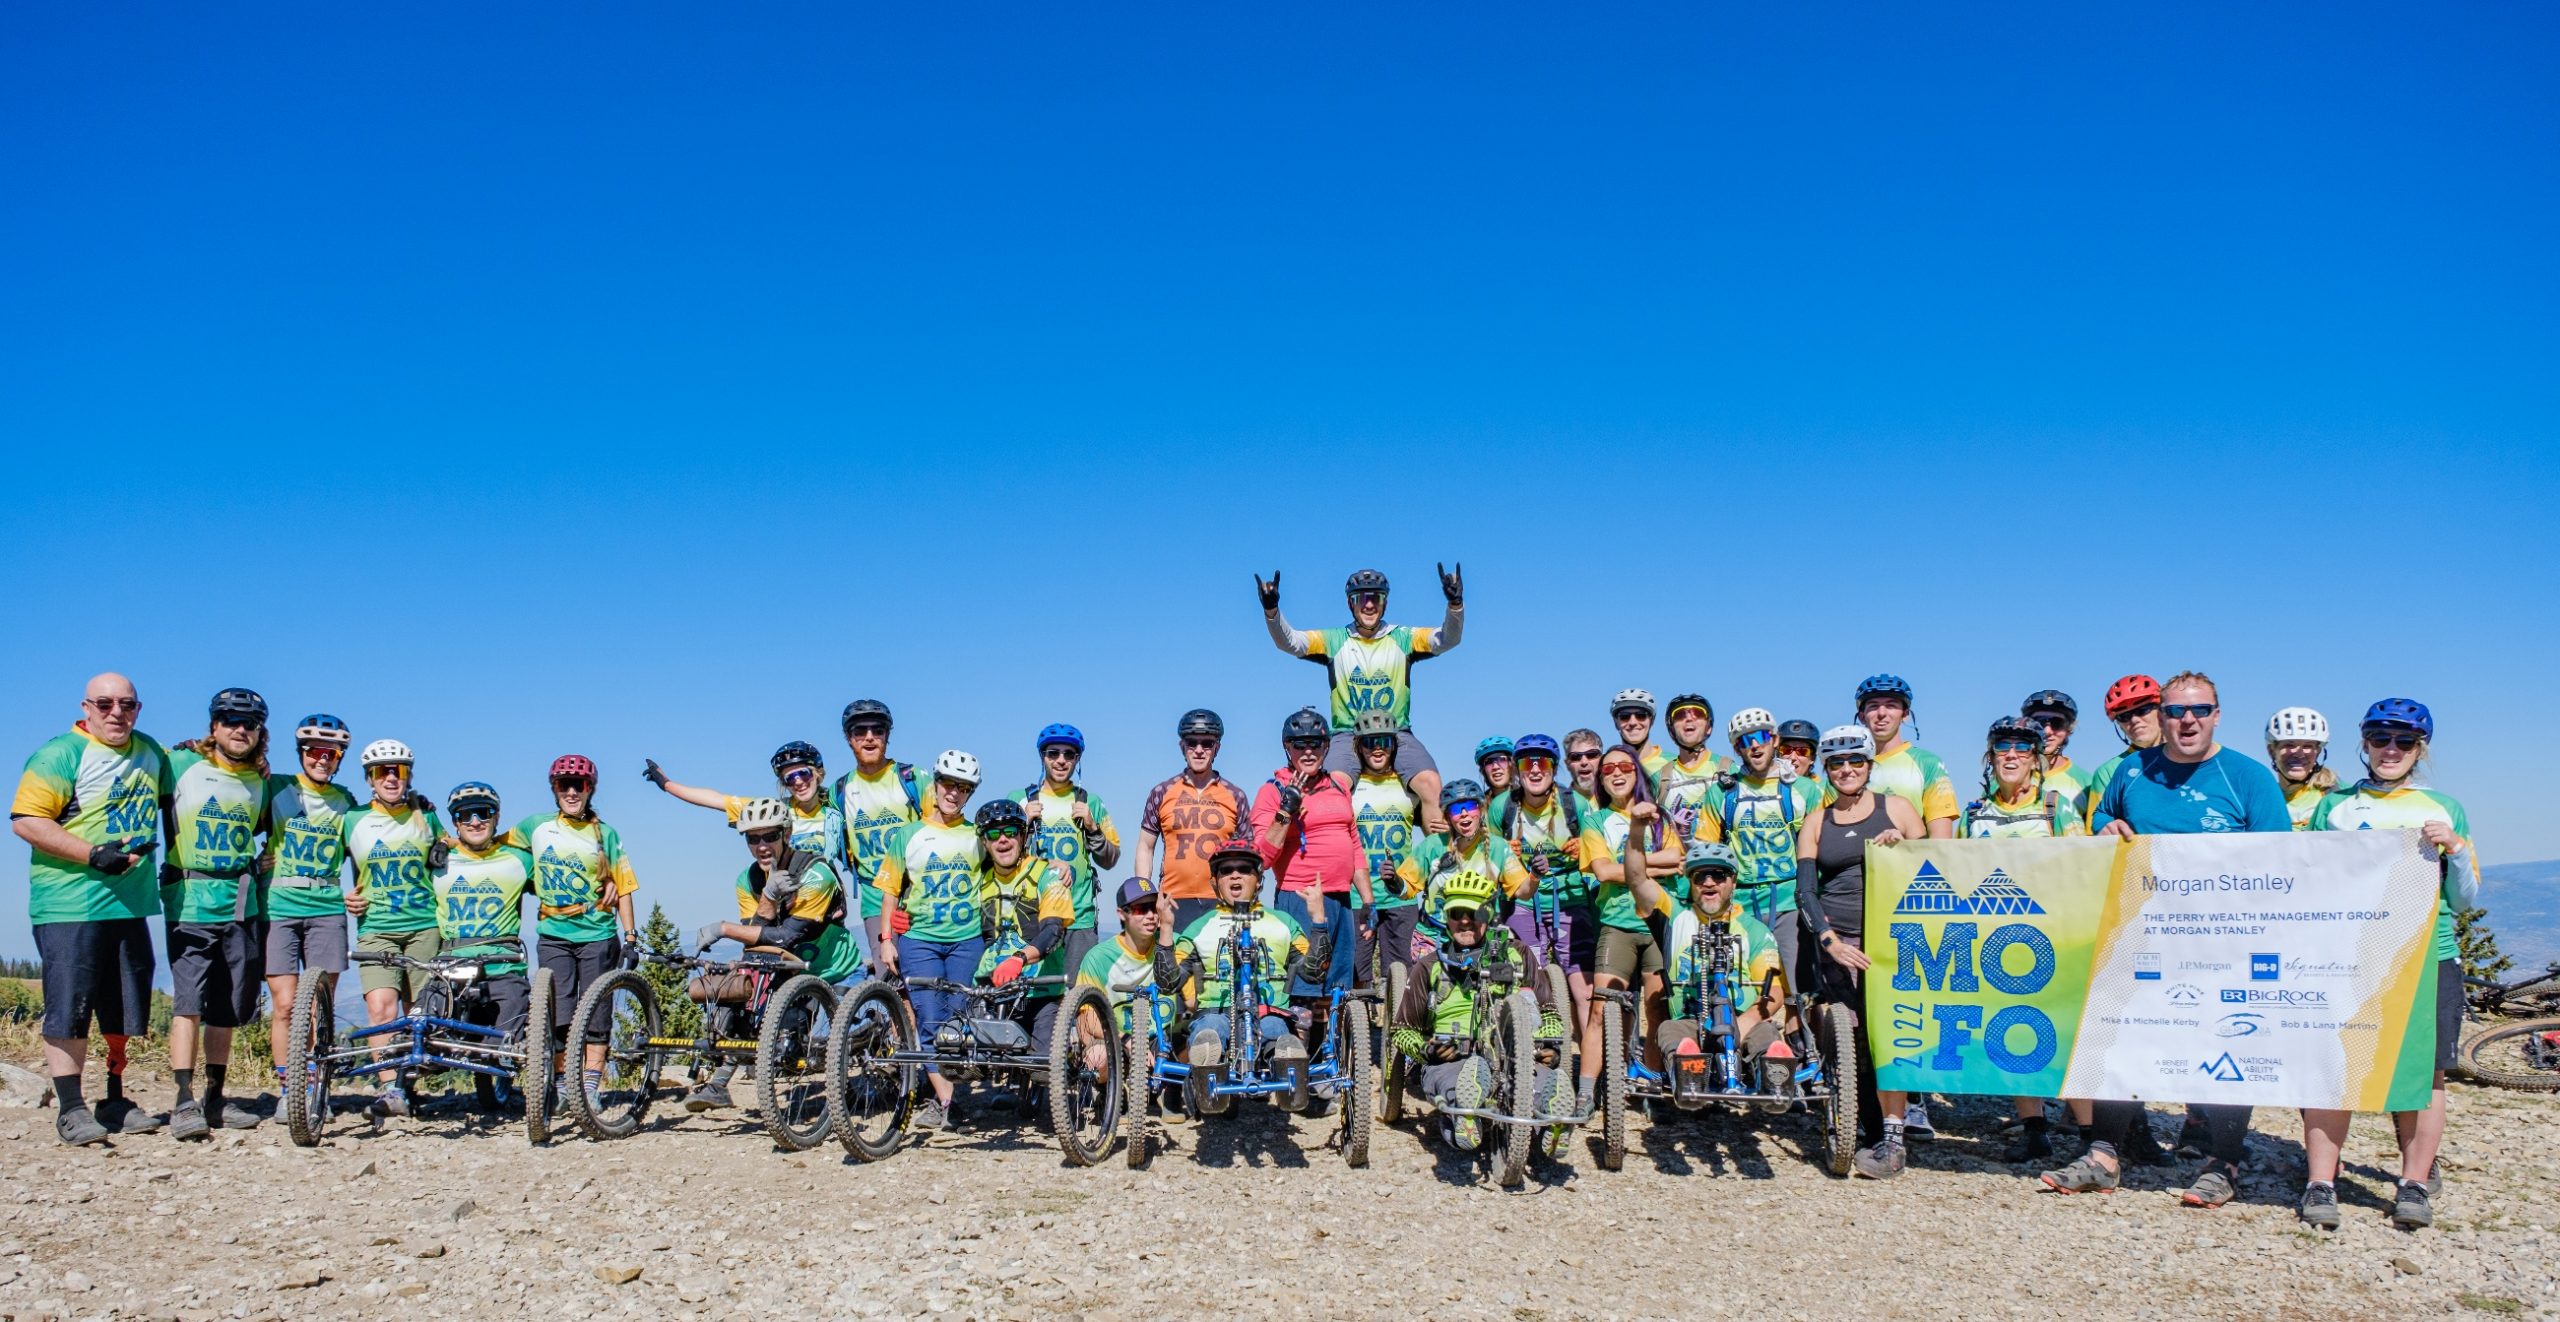 Big Rock Landscaping believes in supporting the community, and is proud to have sponsored the MOFO ‘22 Ride for the National Abilities Center. Find out more about the NAC here.